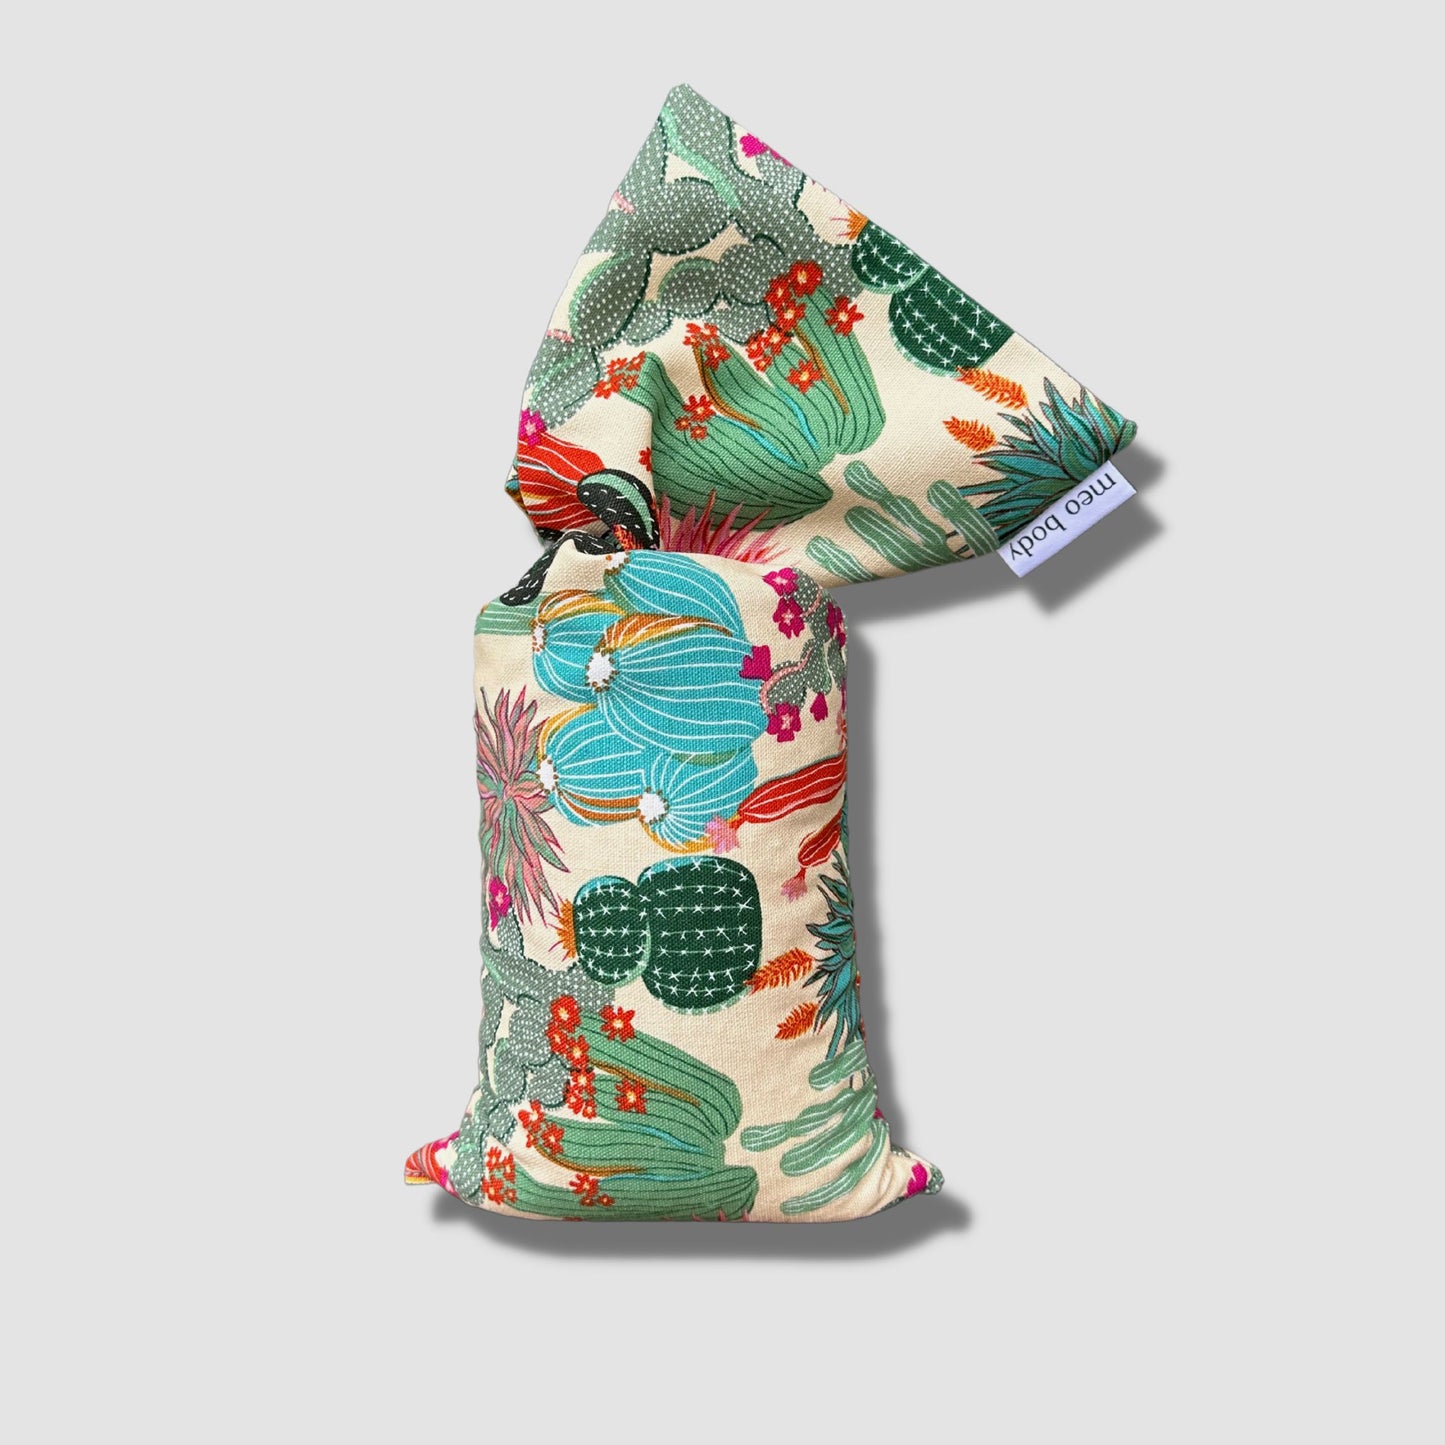 Hand-crafted Wheat Heat Pack, 'Cactus' design - Meo Body